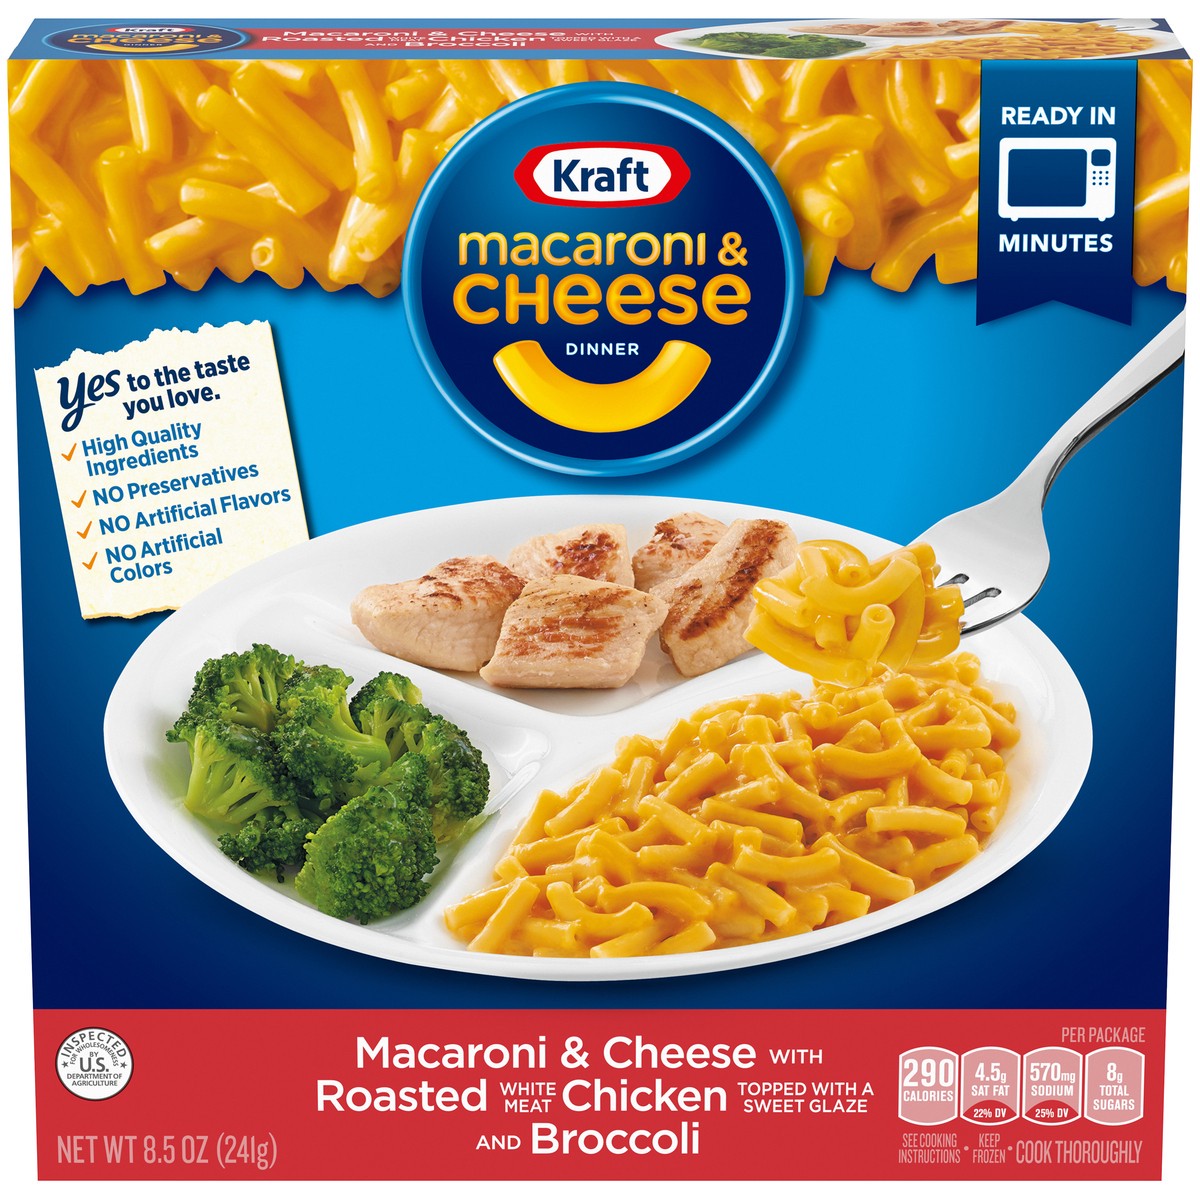 slide 1 of 5, Kraft Macaroni & Cheese Frozen Dinner with Roasted Chicken Topped with a Sweet Glaze & Broccoli, 8.5 oz Box, 8.5 oz